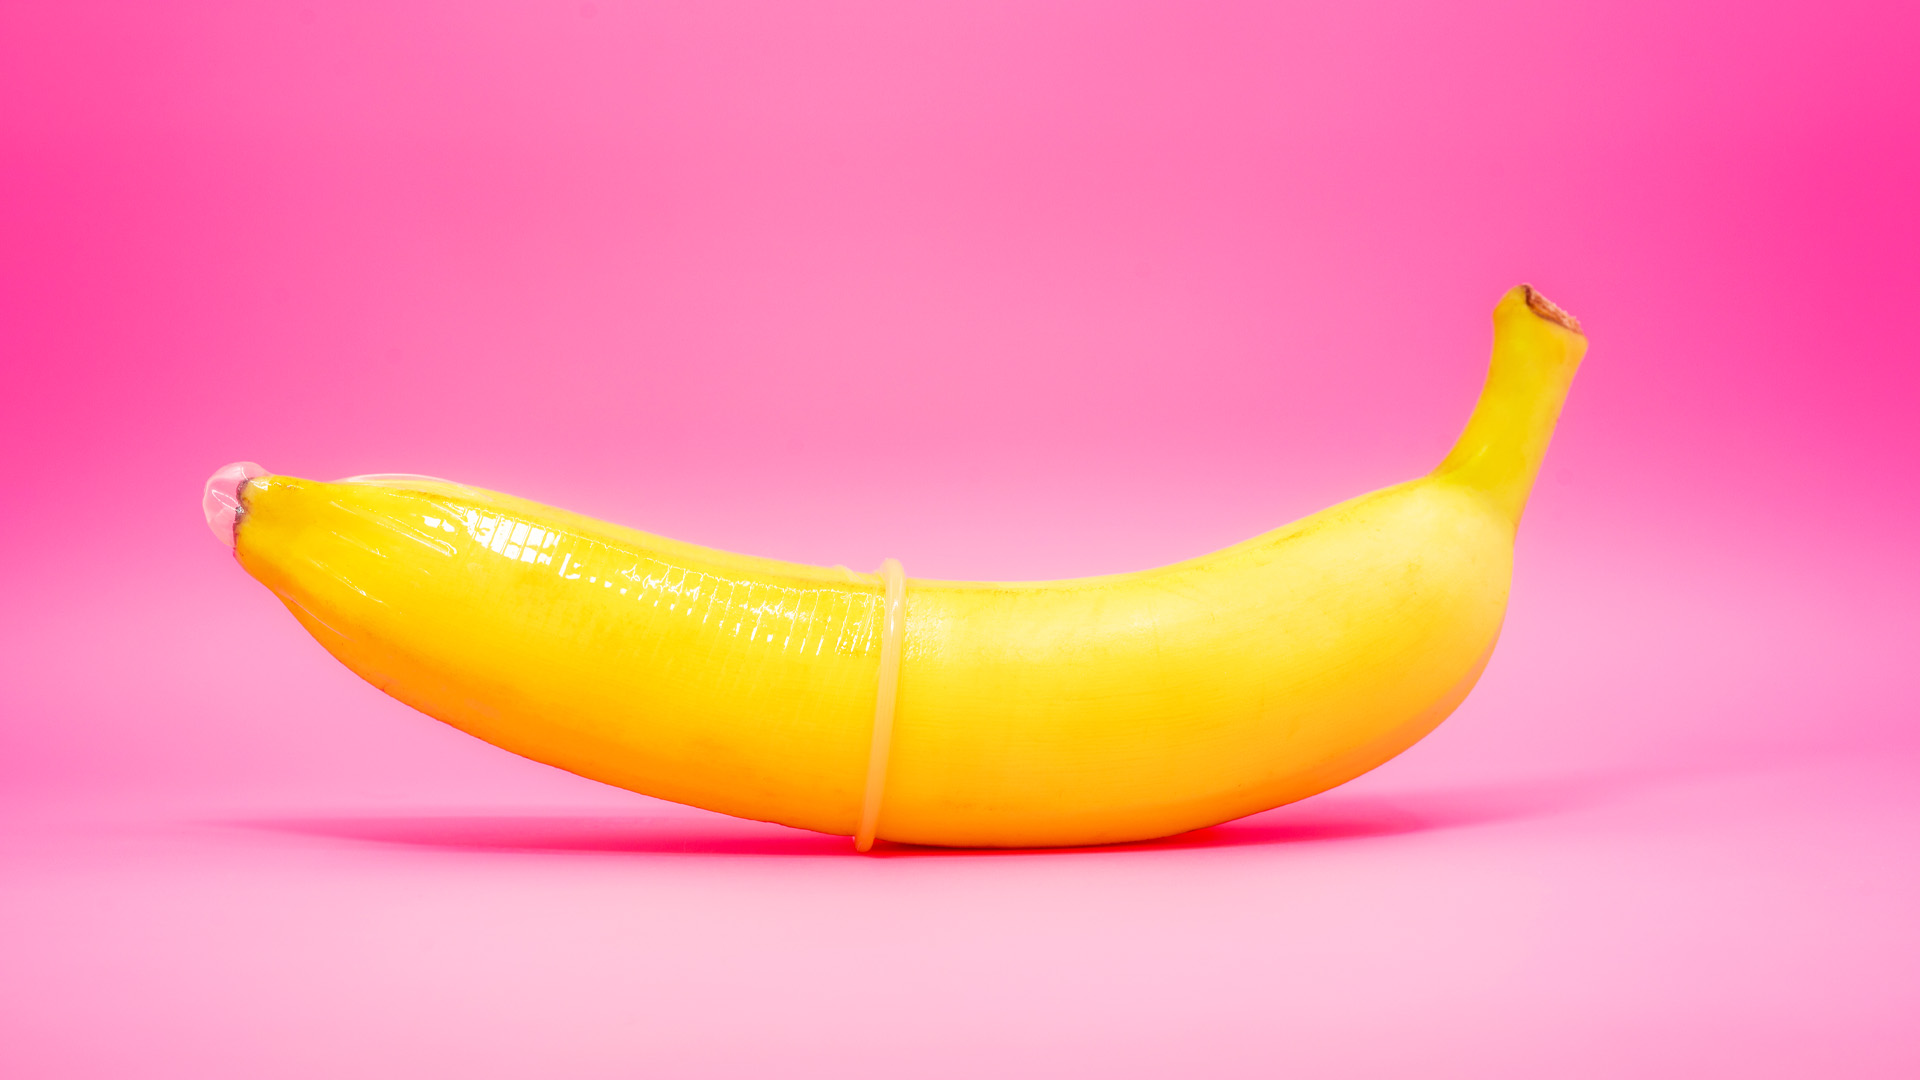 Transparent condom placed on banana. concept of sexual protection